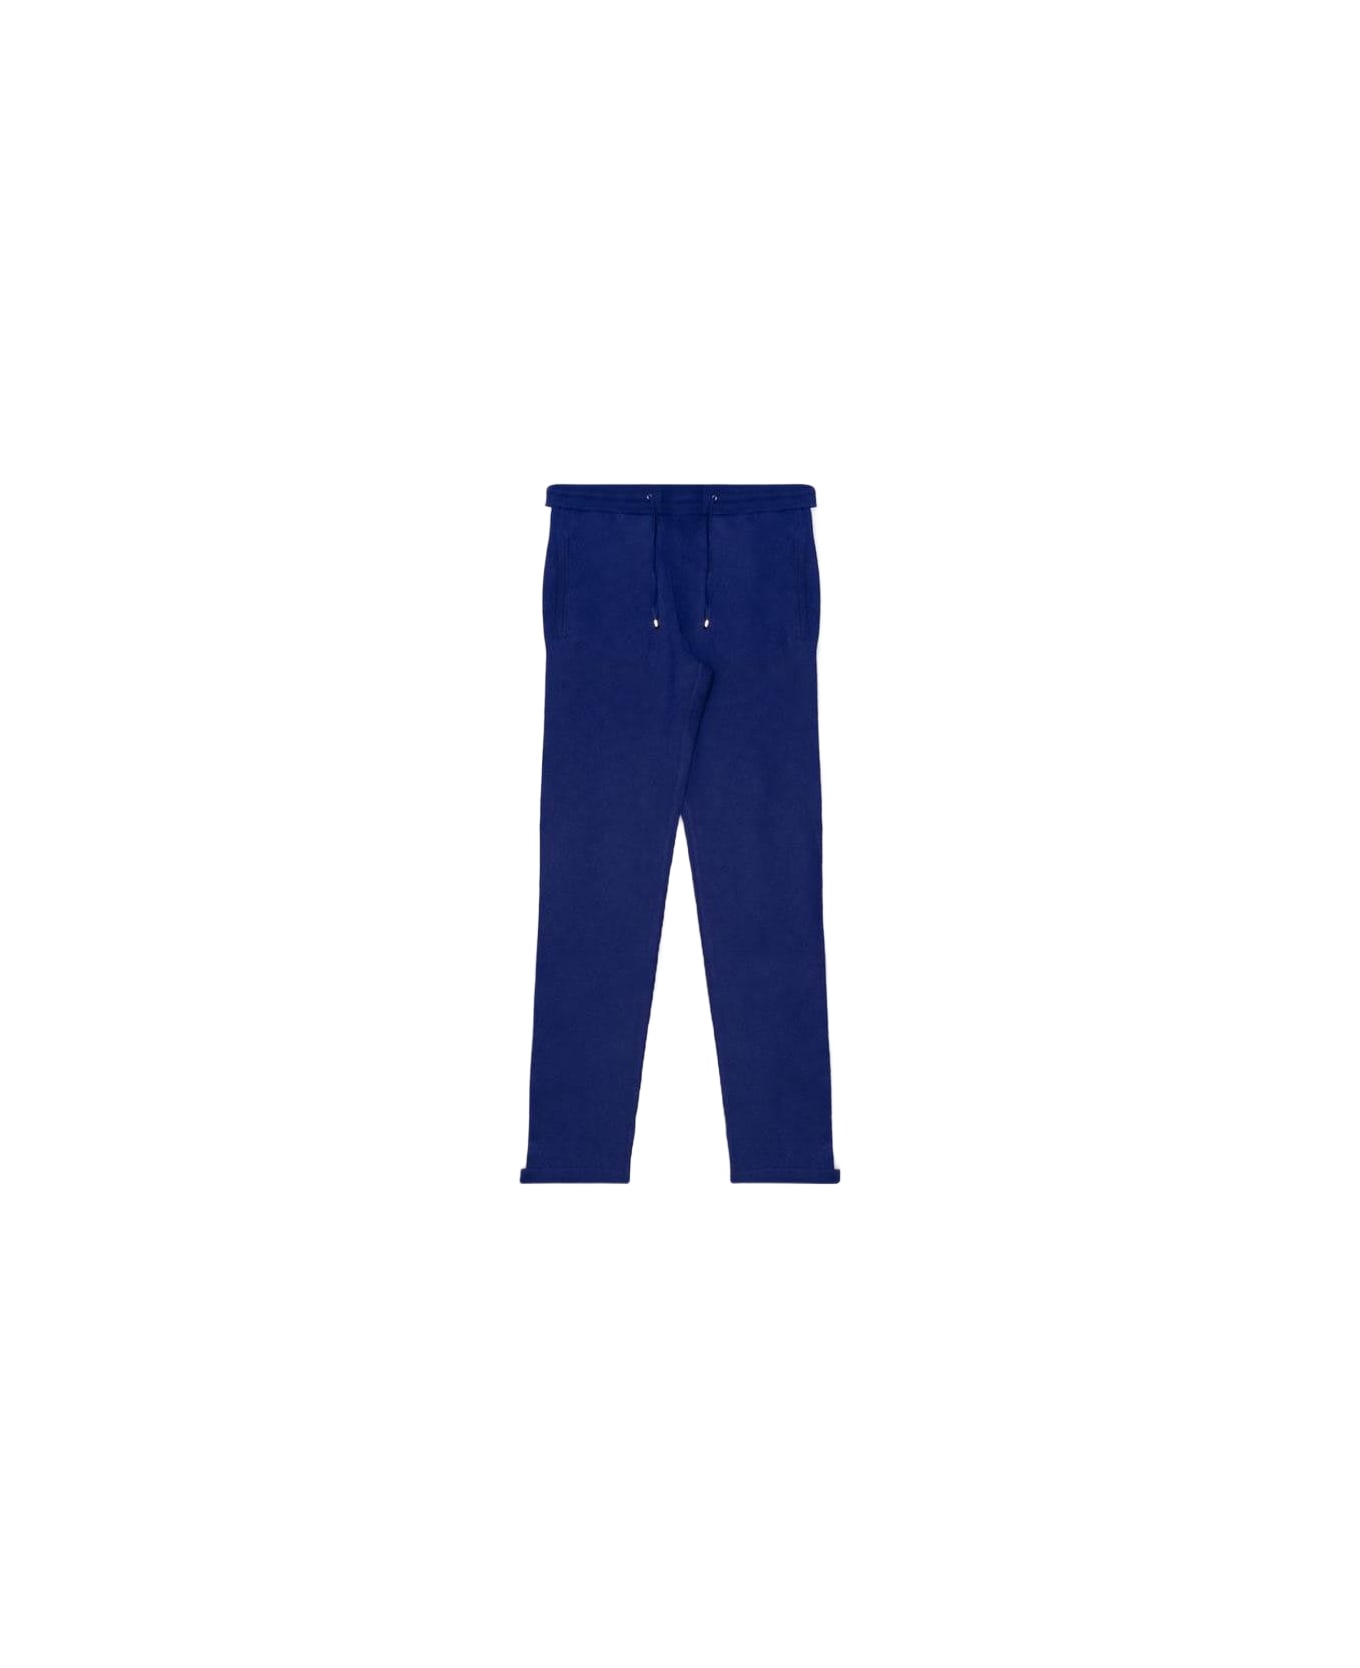 Larusmiani Trousers Ski Collection Pants - Blue ボトムス